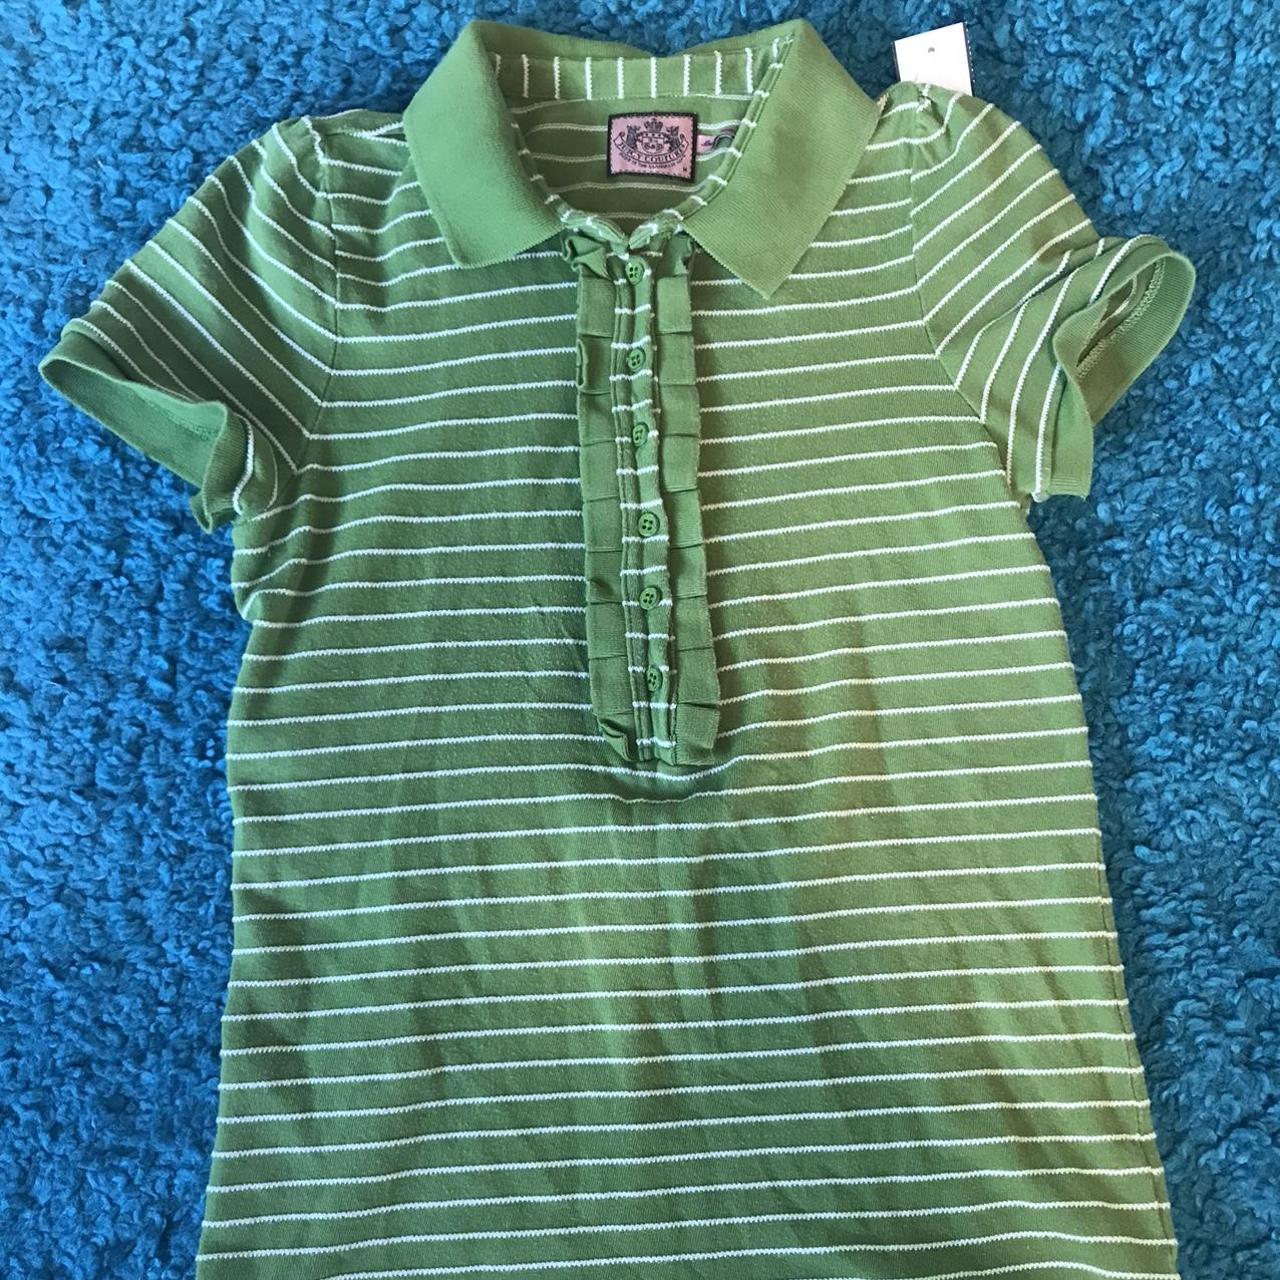 Vintage Juicy Couture y2k polo tee! Size M, stretchy... - Depop